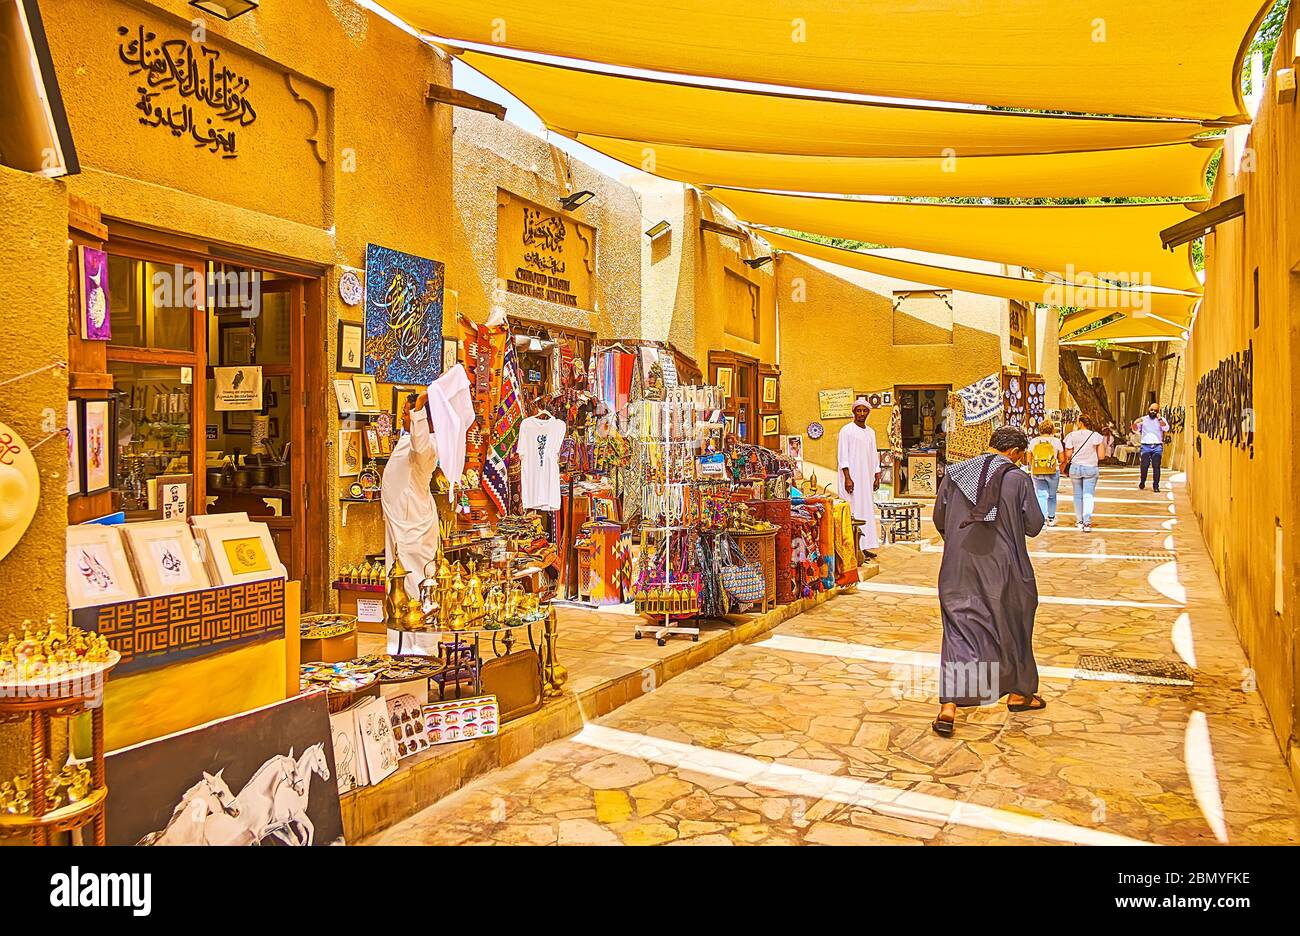 DUBAI, UAE - MARCH 2, 2020: The shady streeet of Al Fahidi district art galleries and stores of Al Souq Al Kabeer market, offering traditional crocker Stock Photo